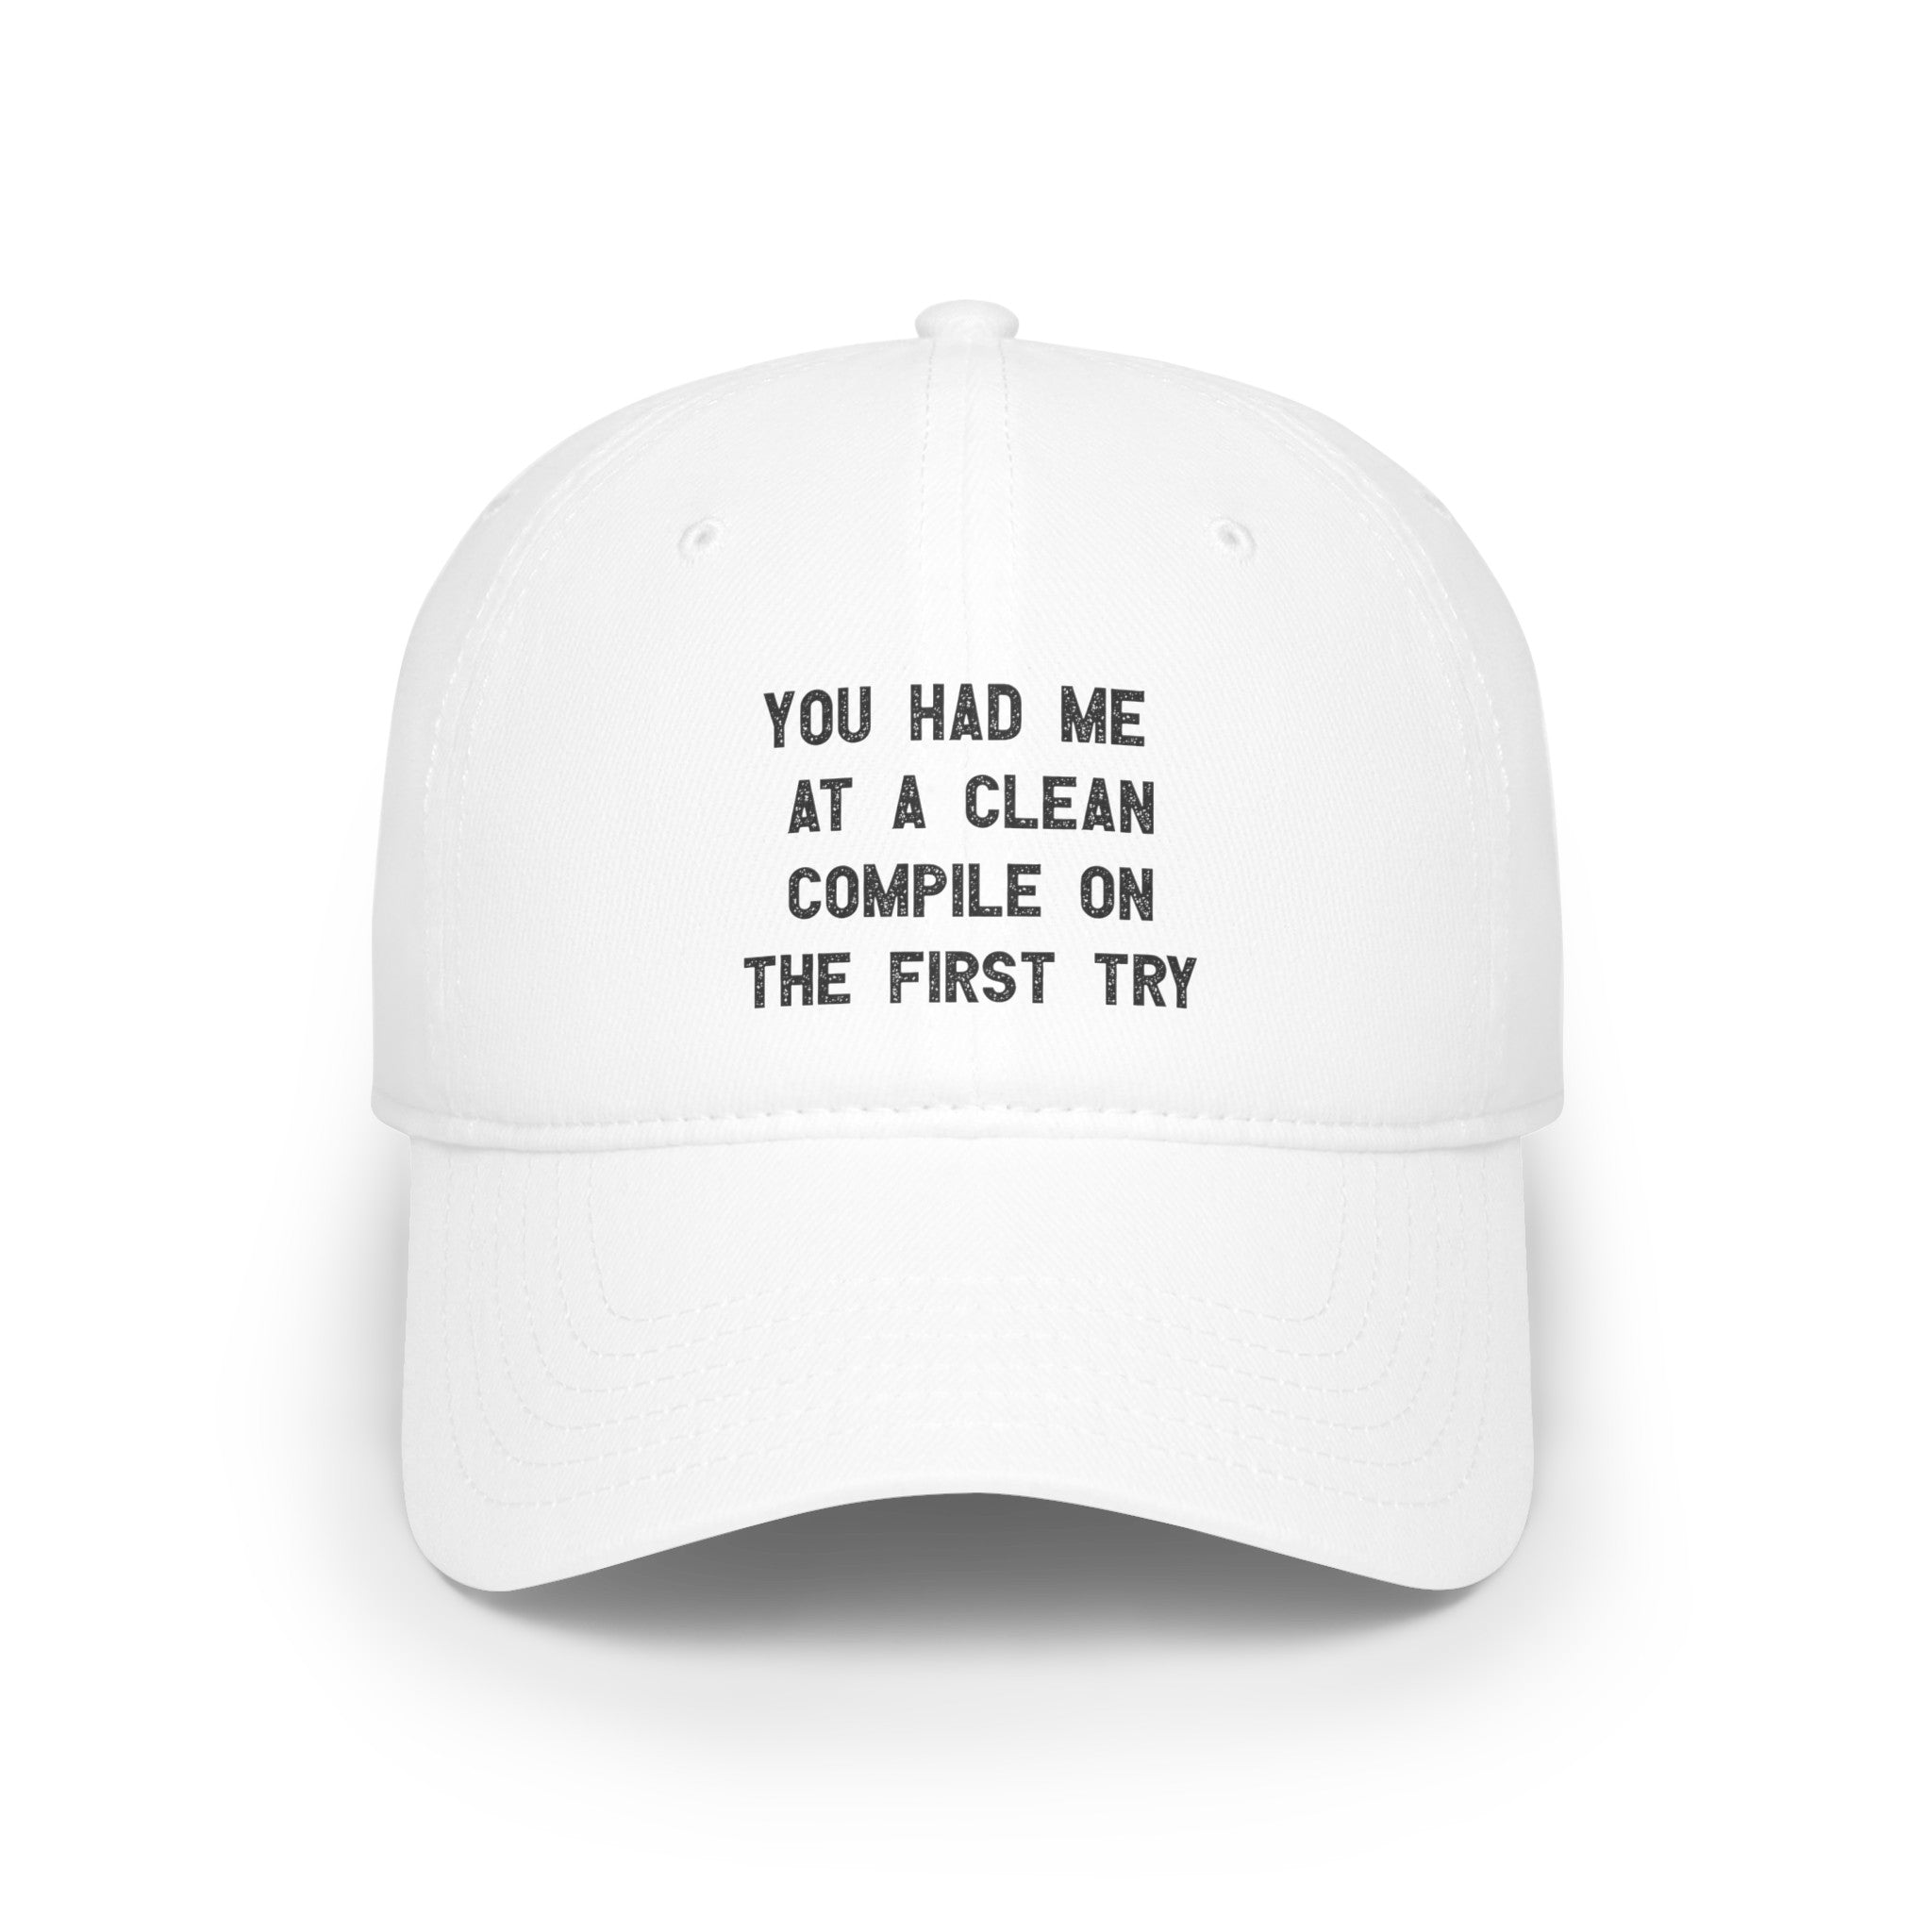 A white You Had Me At a Clean Compile on the First Try - Hat that speaks coder lingo: "You had me at a Clean Compile on the first try" printed in black letters on the front.